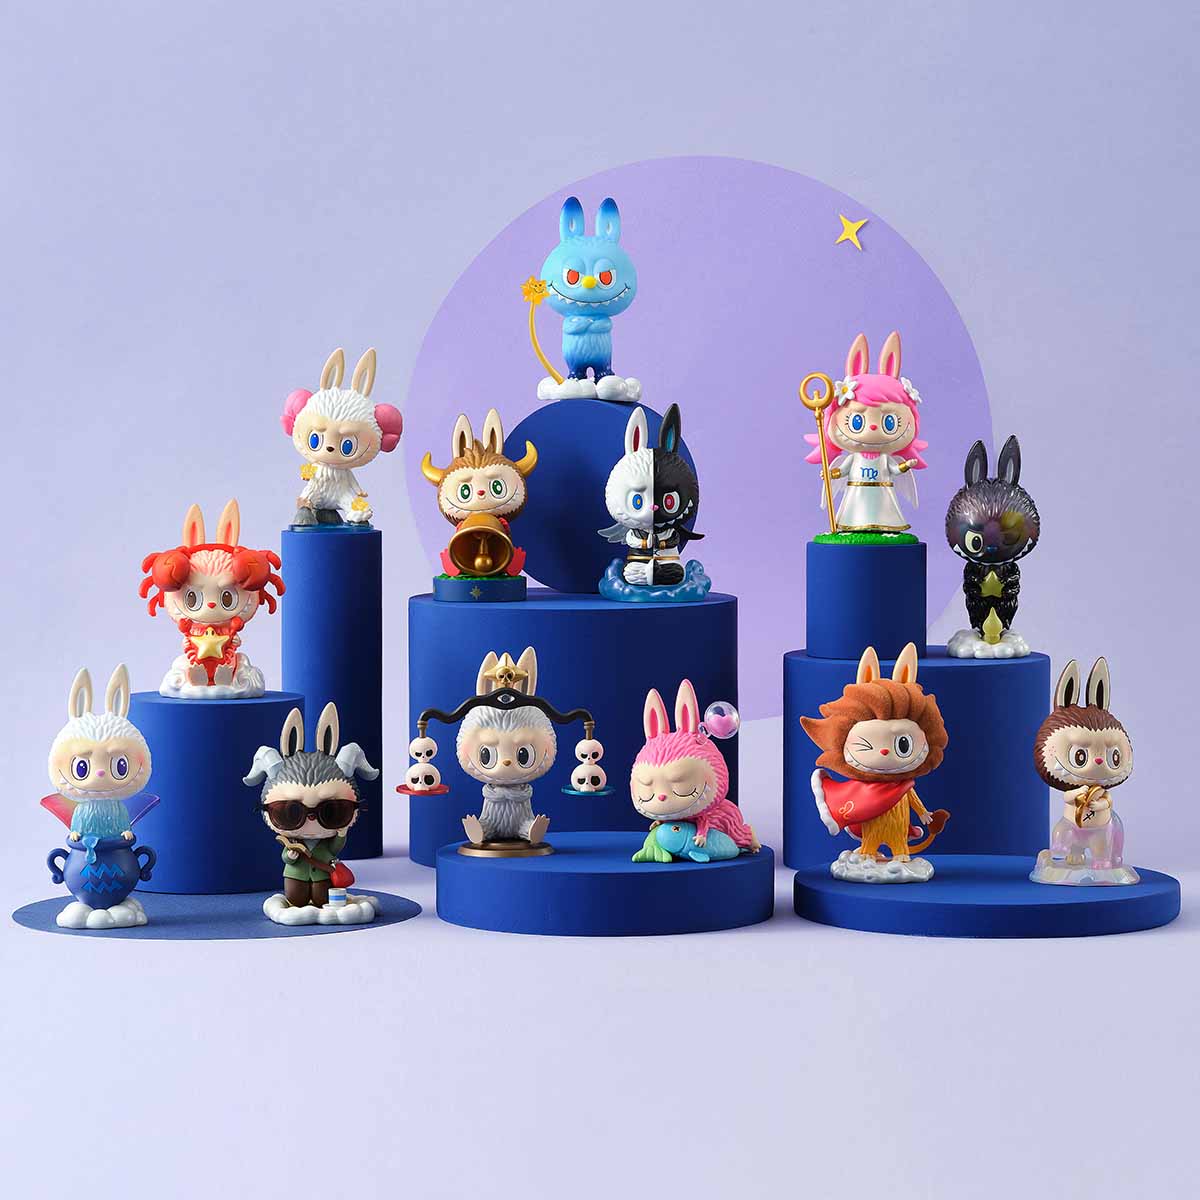 【New】THE MONSTERS Constellation Series Blind Box Random Style